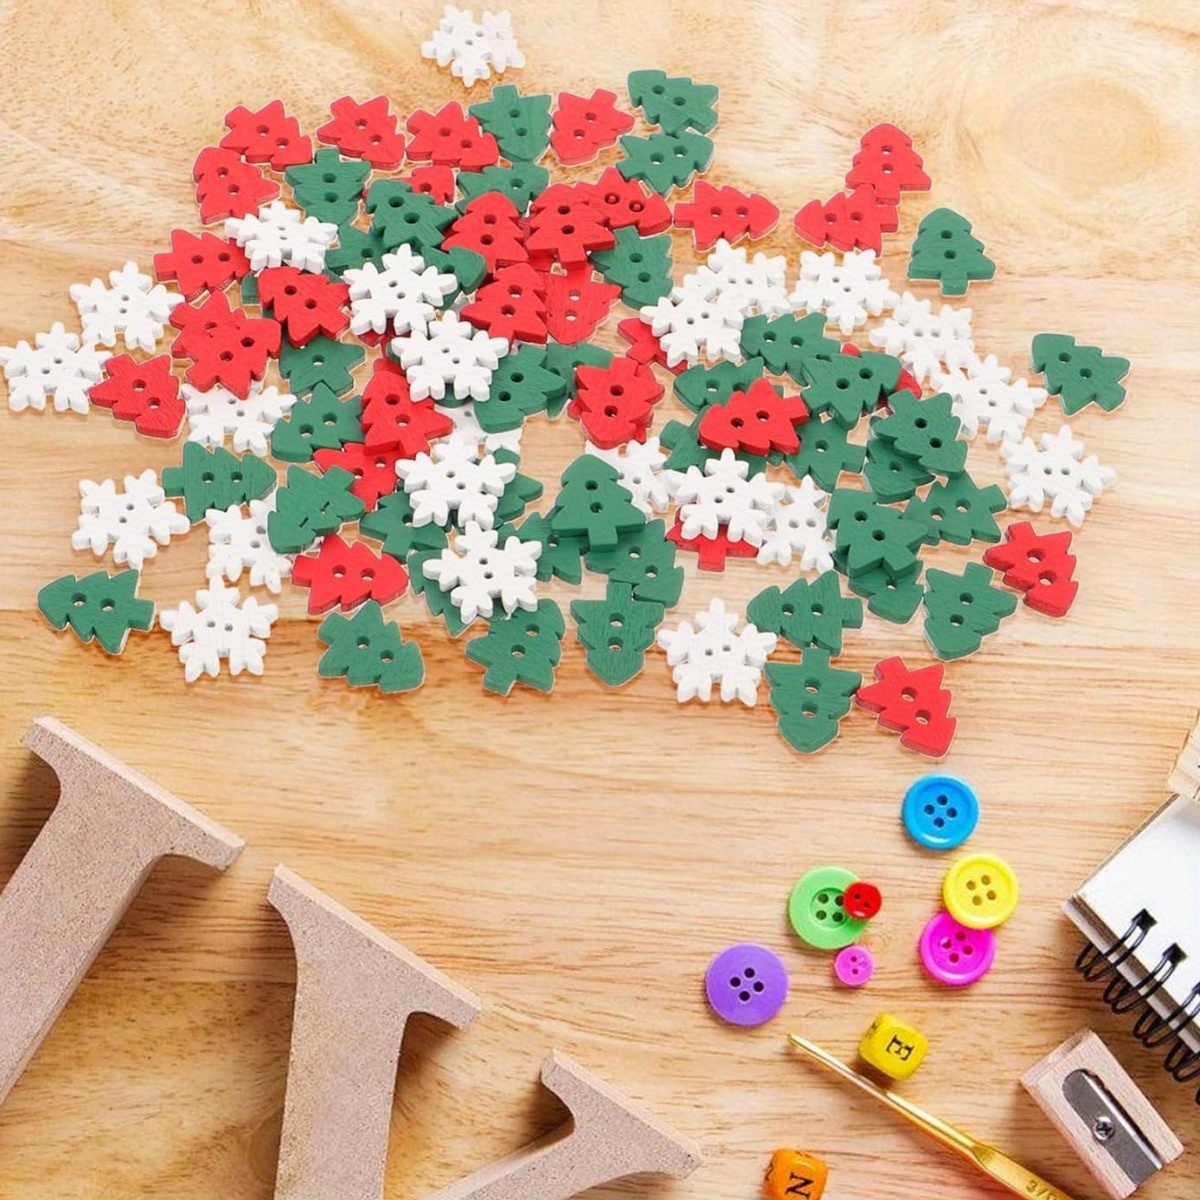 50pcs Mixed Wood Wooden Snowflakes Xmas Trees Snowman Christmas Party  Decorations DIY Crafts Gift Packaging Decor Wood Buttons